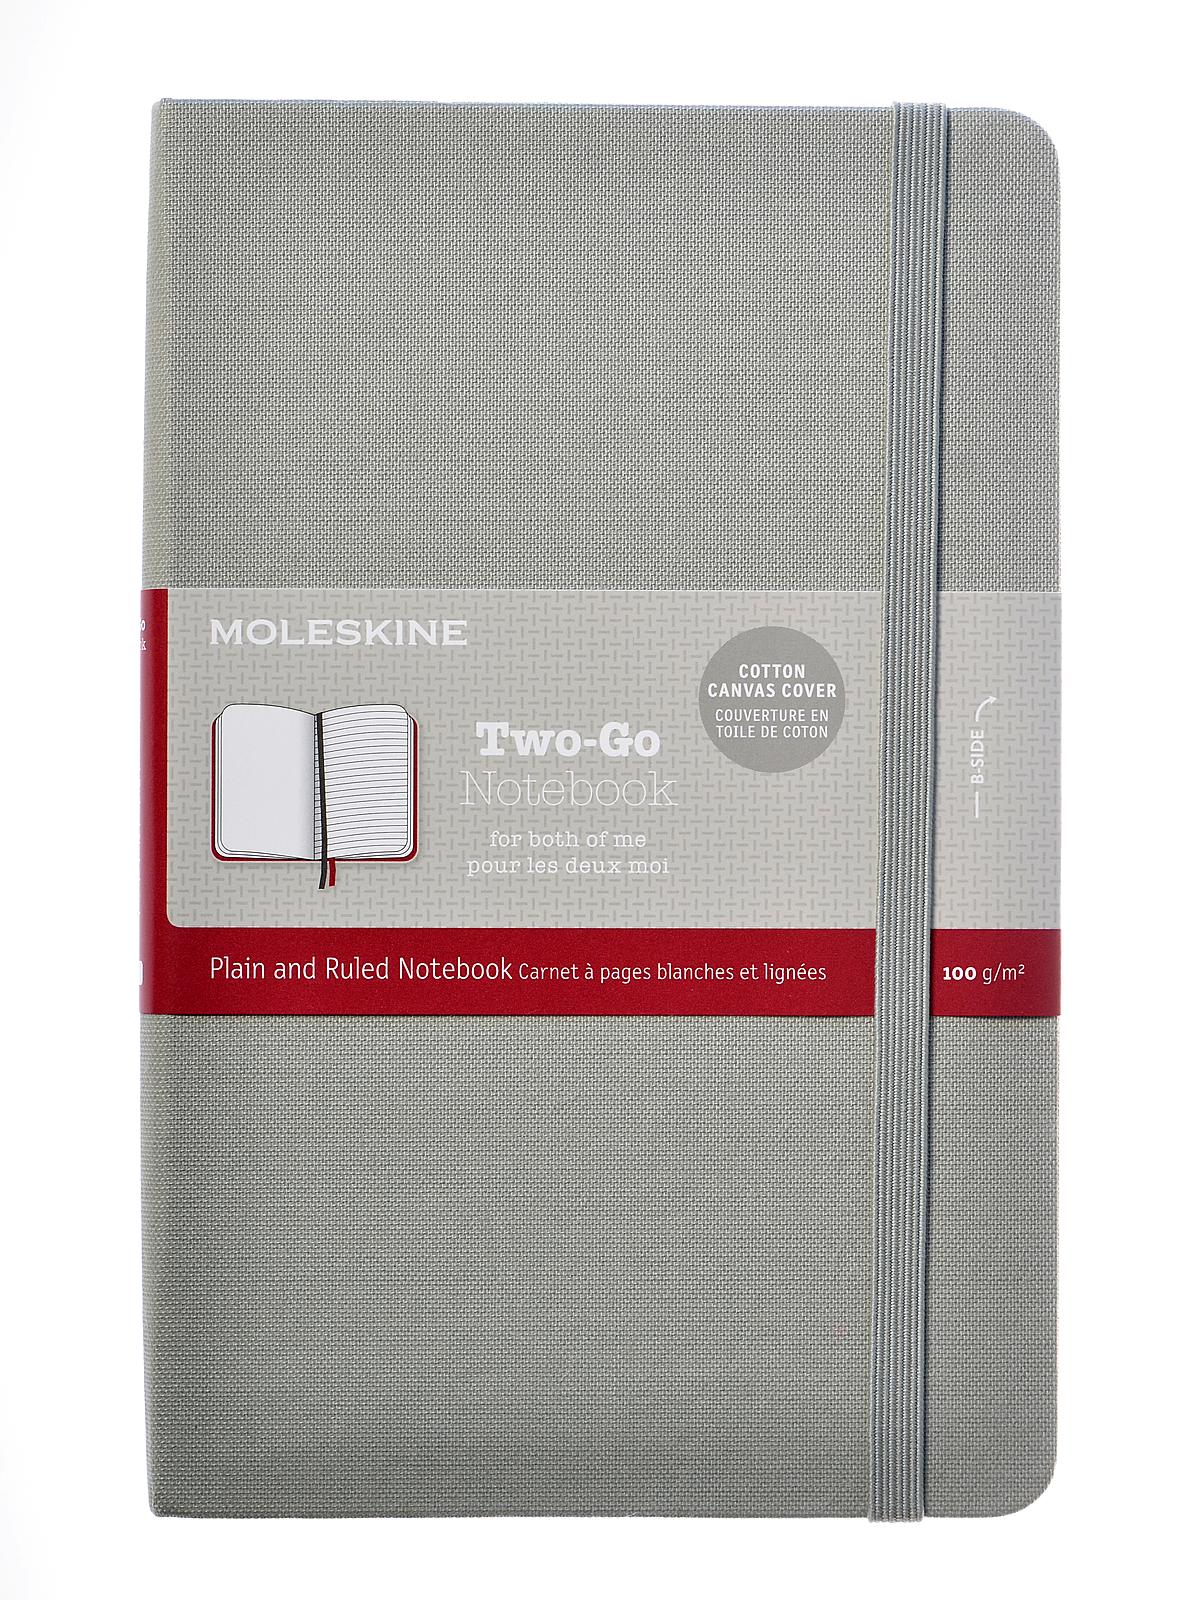 Two-go Notebook Ash Grey 4 1 2 In. X 7 In. 144 Pages